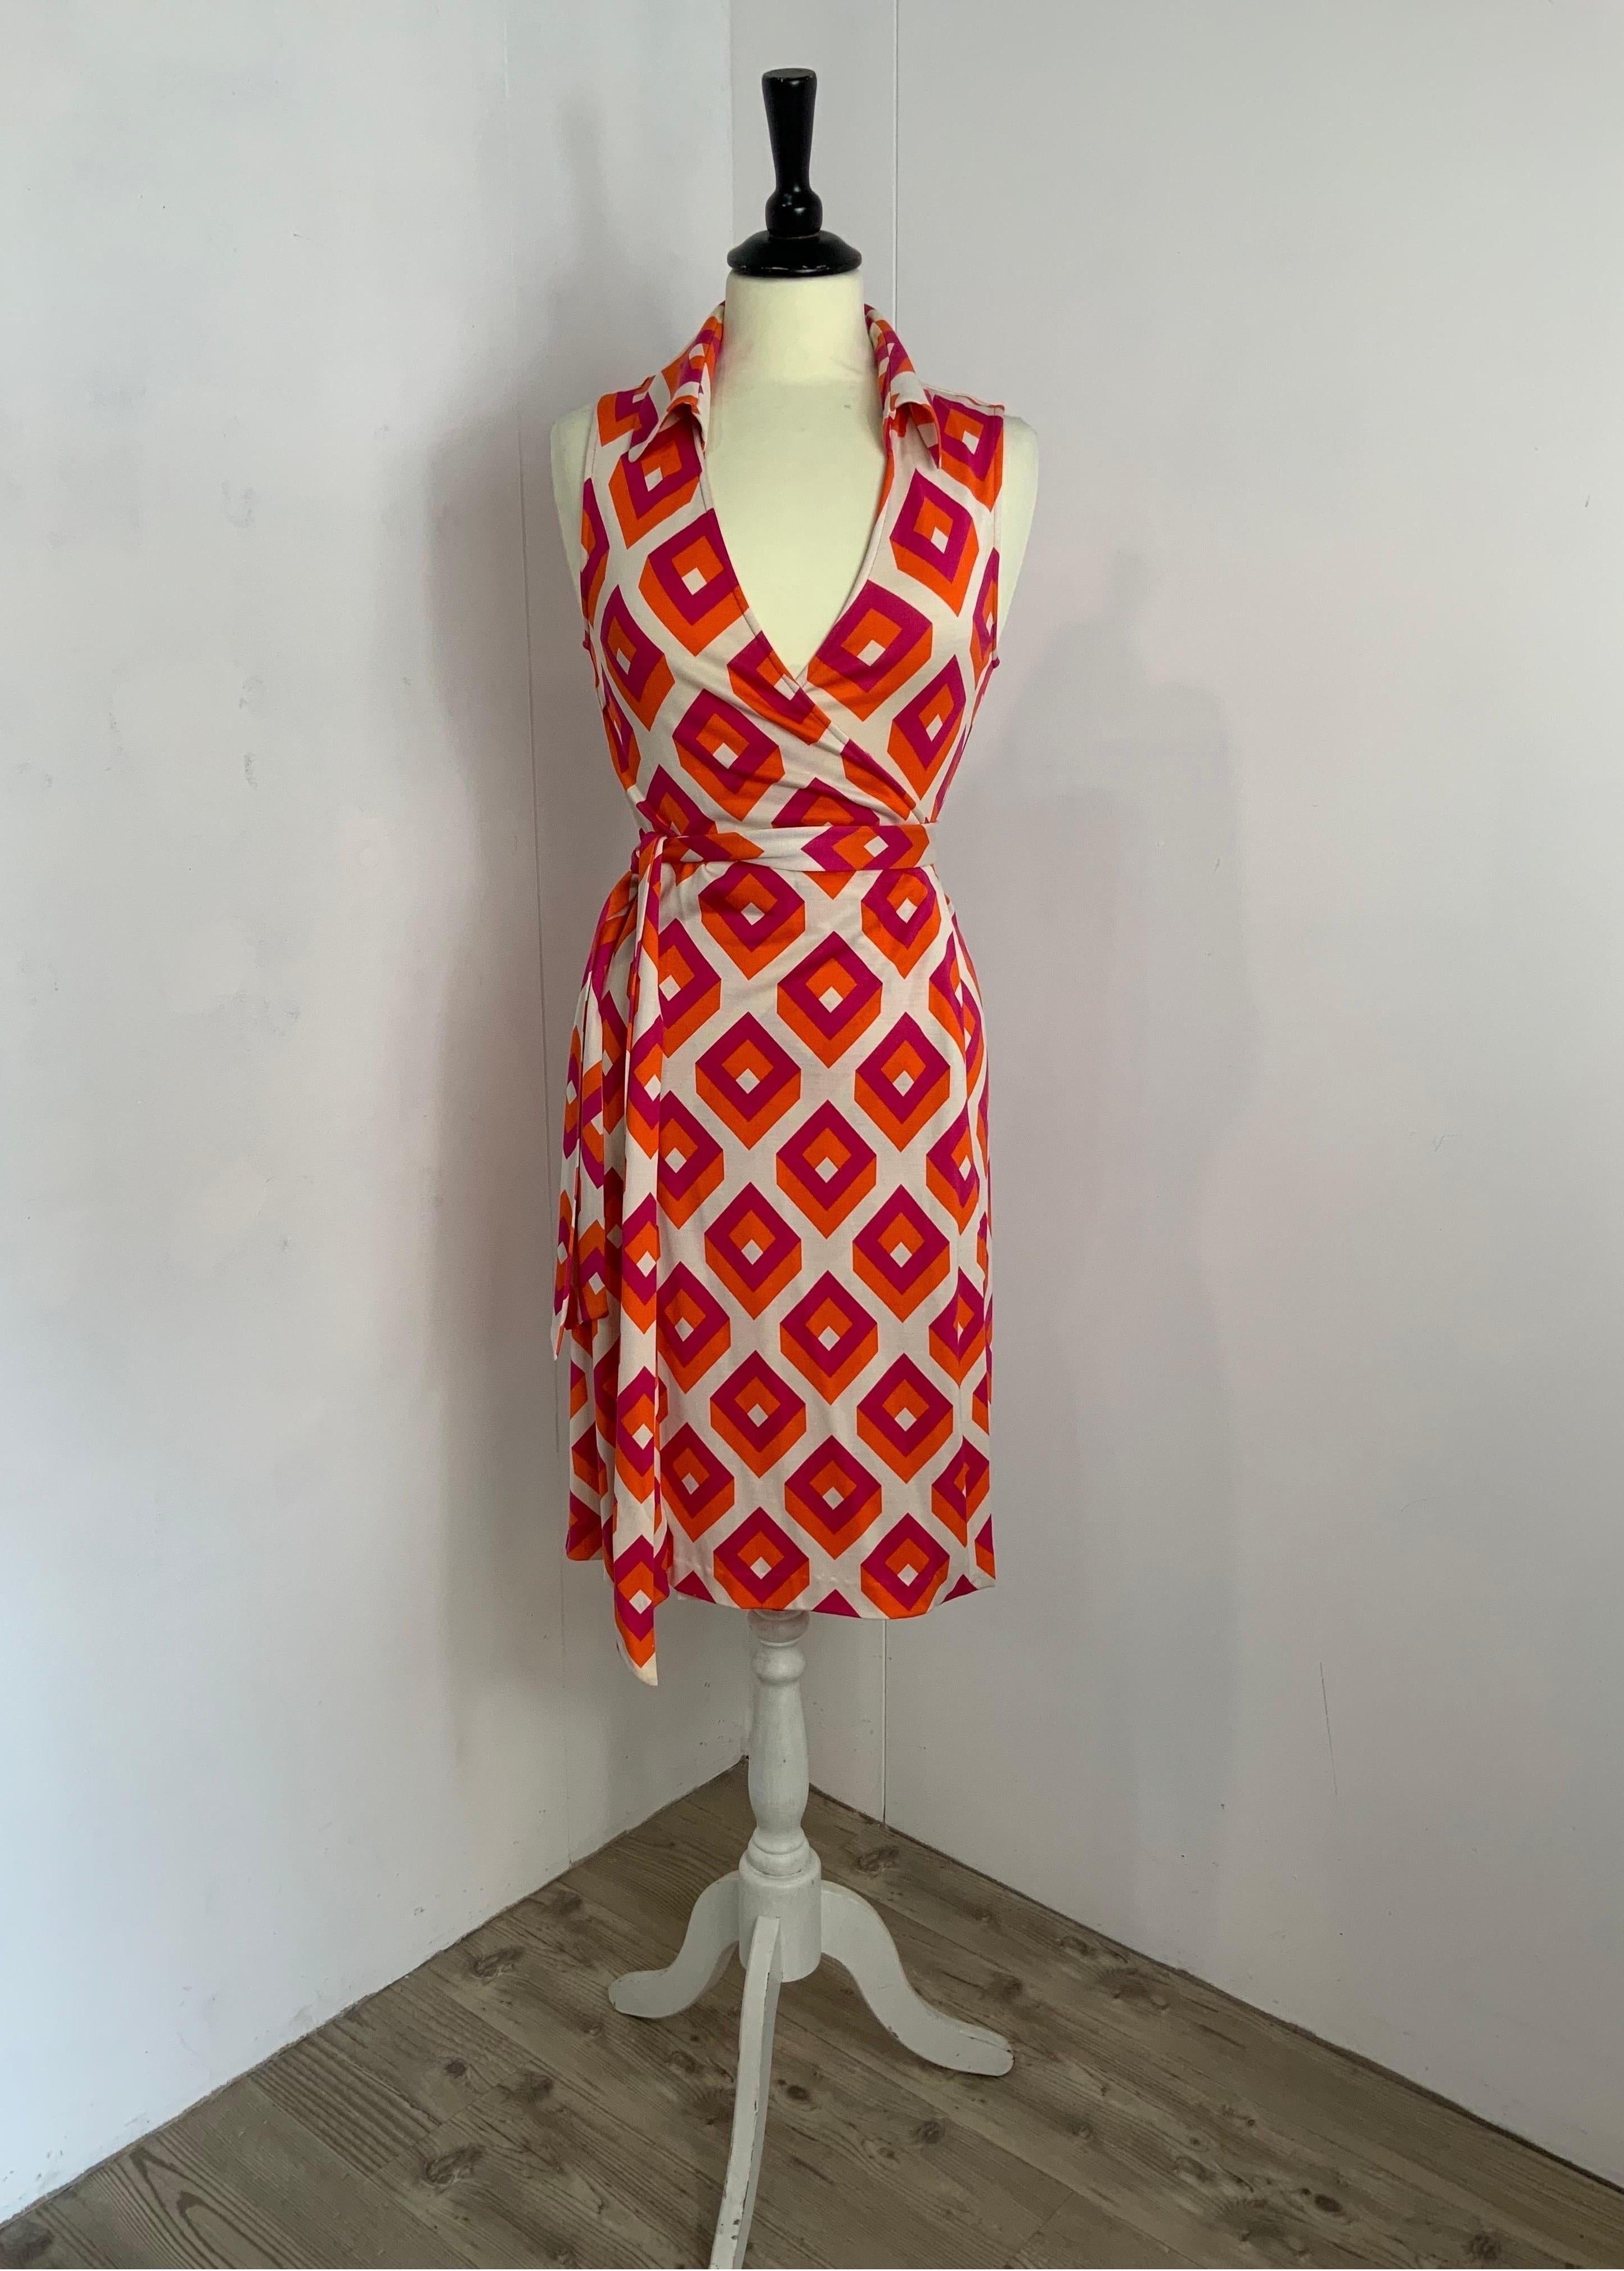 DIANE VON FURSTENBERG DRESS.
In silk with a geometric pattern.
Size 6 which corresponds to an international S/M.
Wallet closure.
Shoulders 33 cm
Bust 40cm
Length 102 cm
In good general condition, it shows signs of normal use and some halo on the